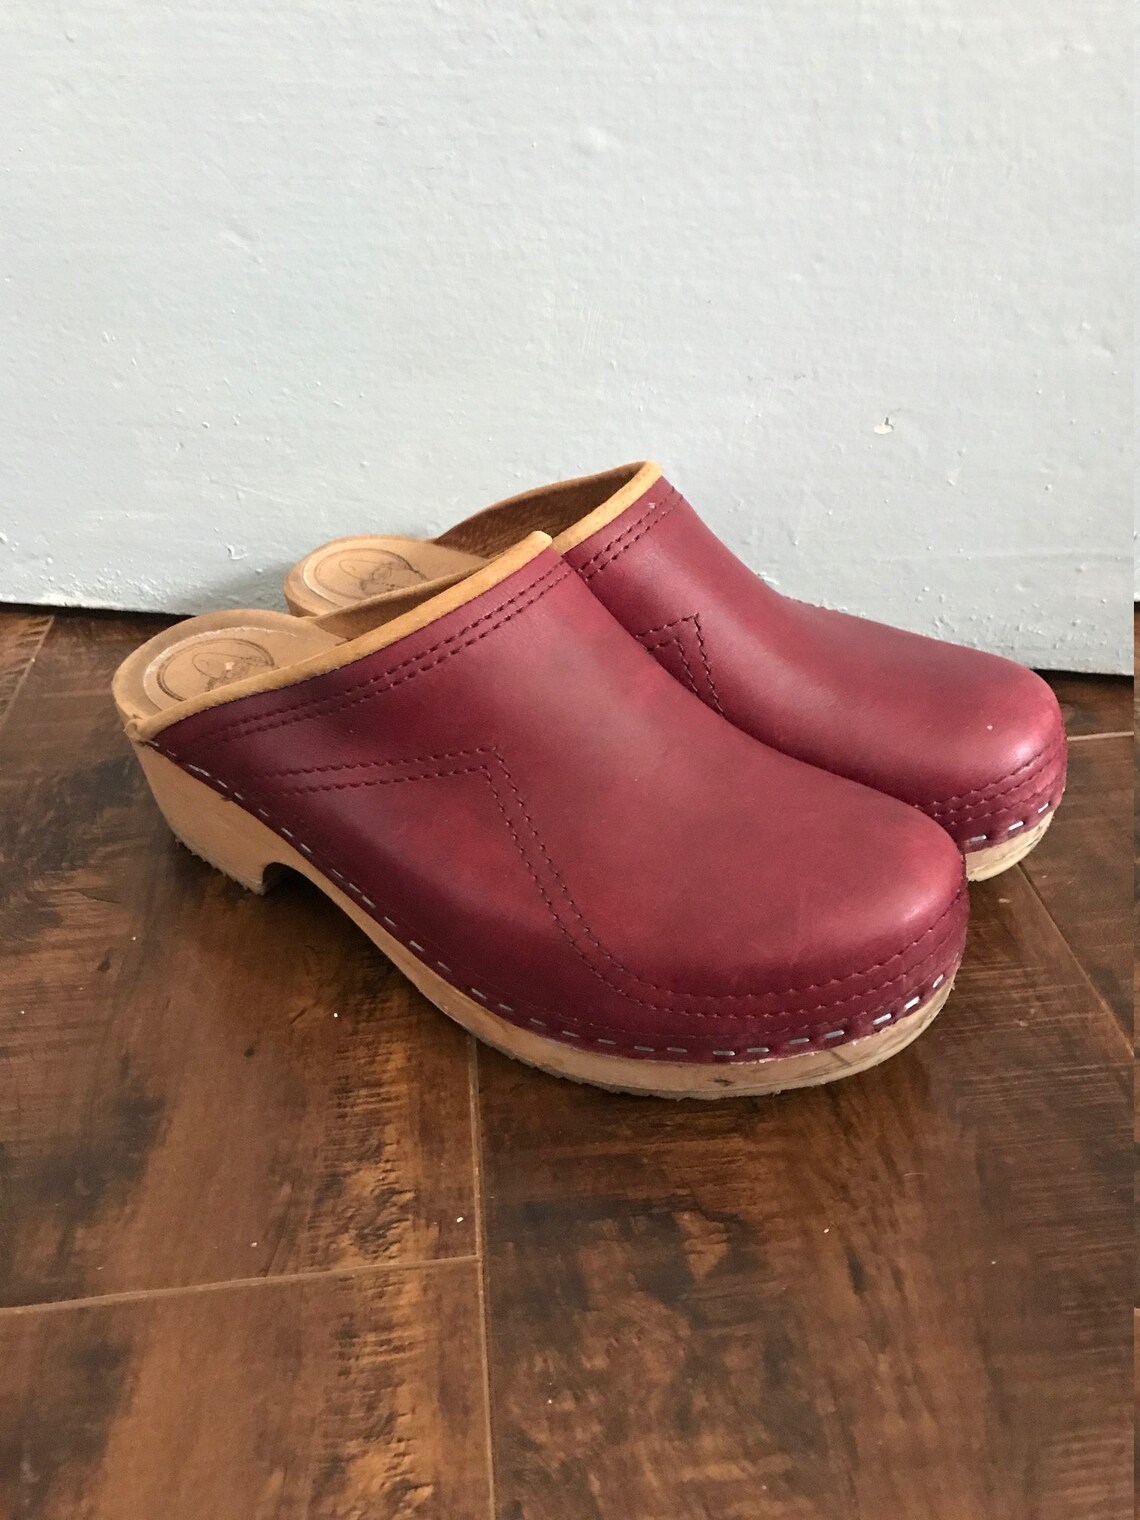 Vintage Samhall Trolls Clogs in burgundy and tan leather | Etsy